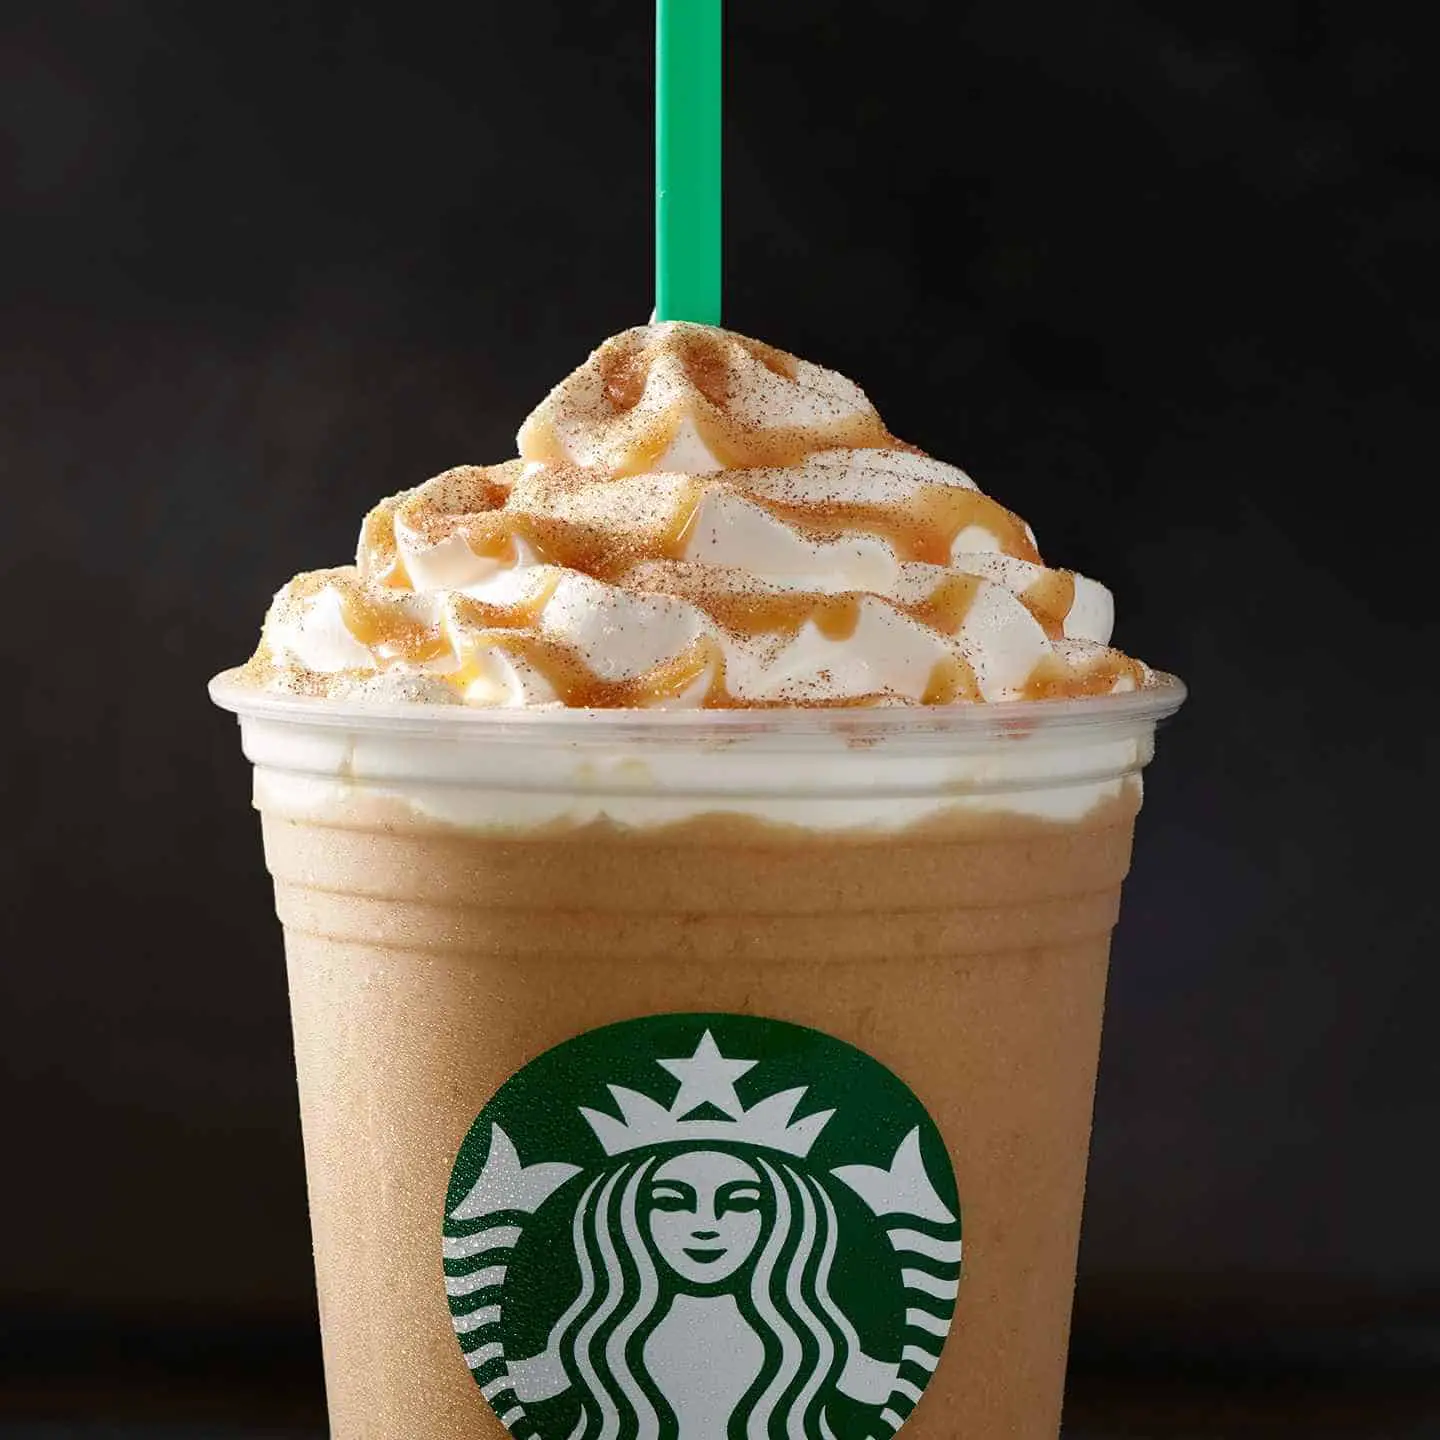 What’s the Difference Between a Frappuccino and a Latte?